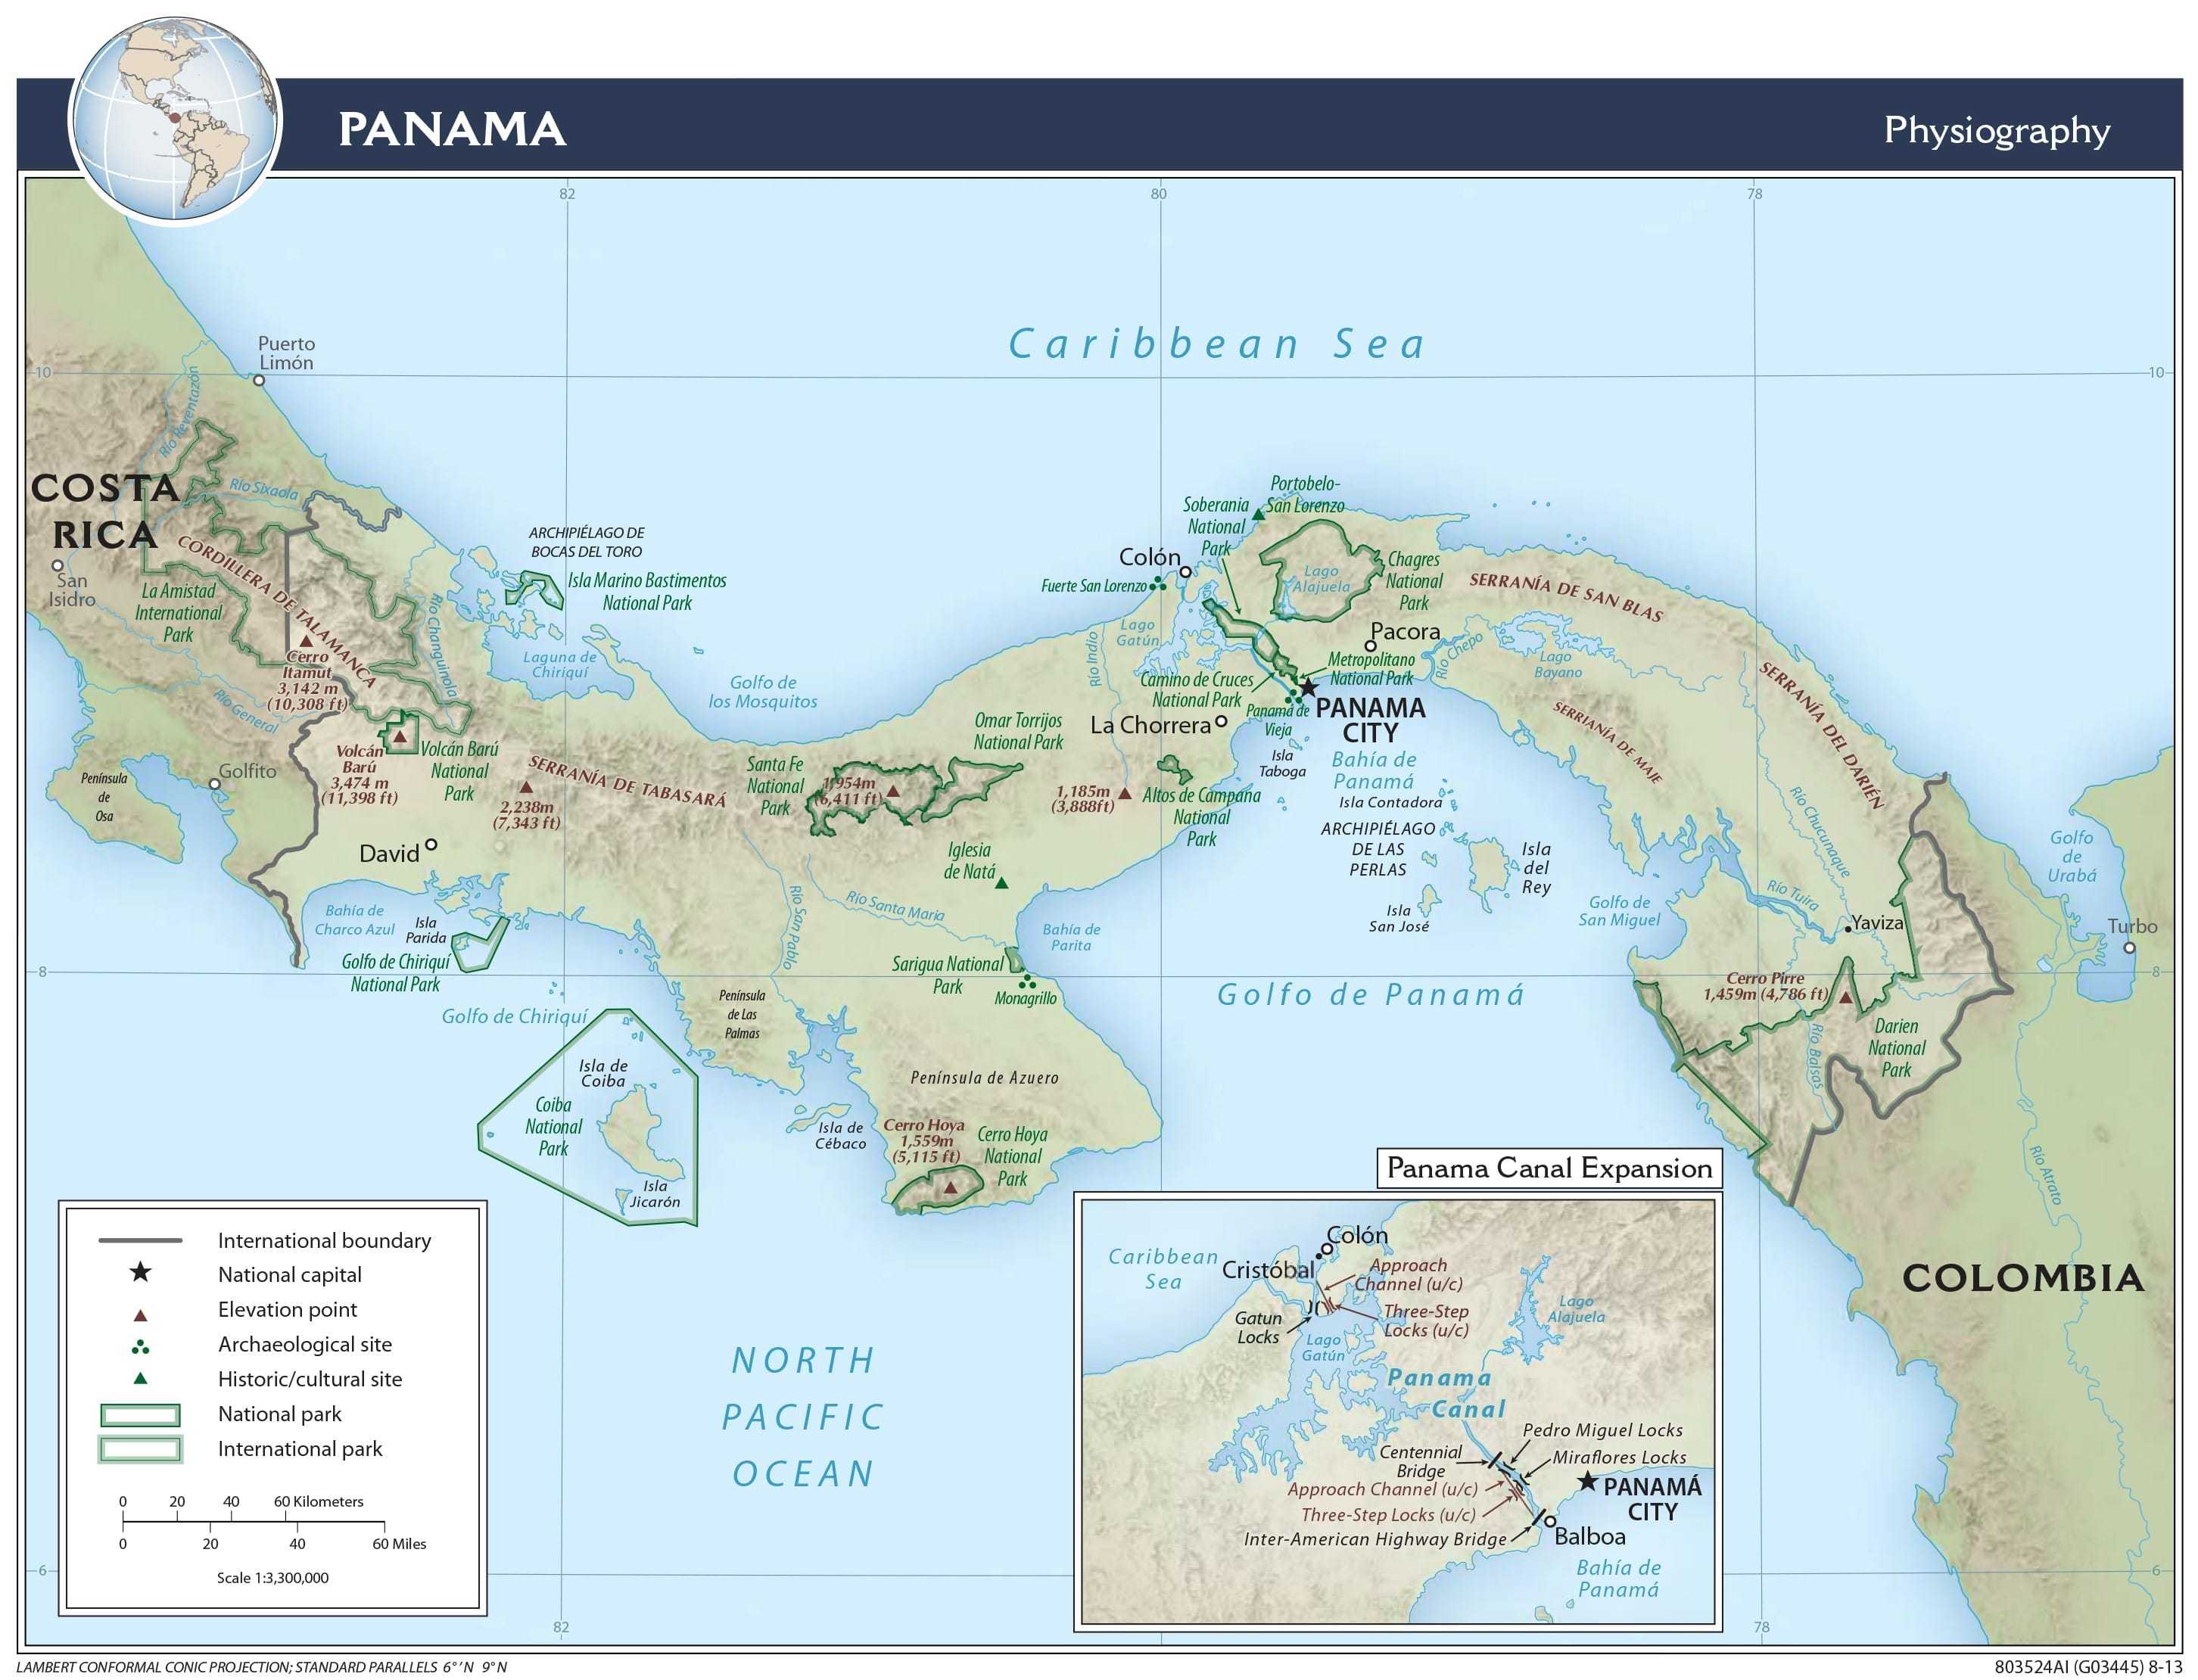 Physiographical map of Panama.